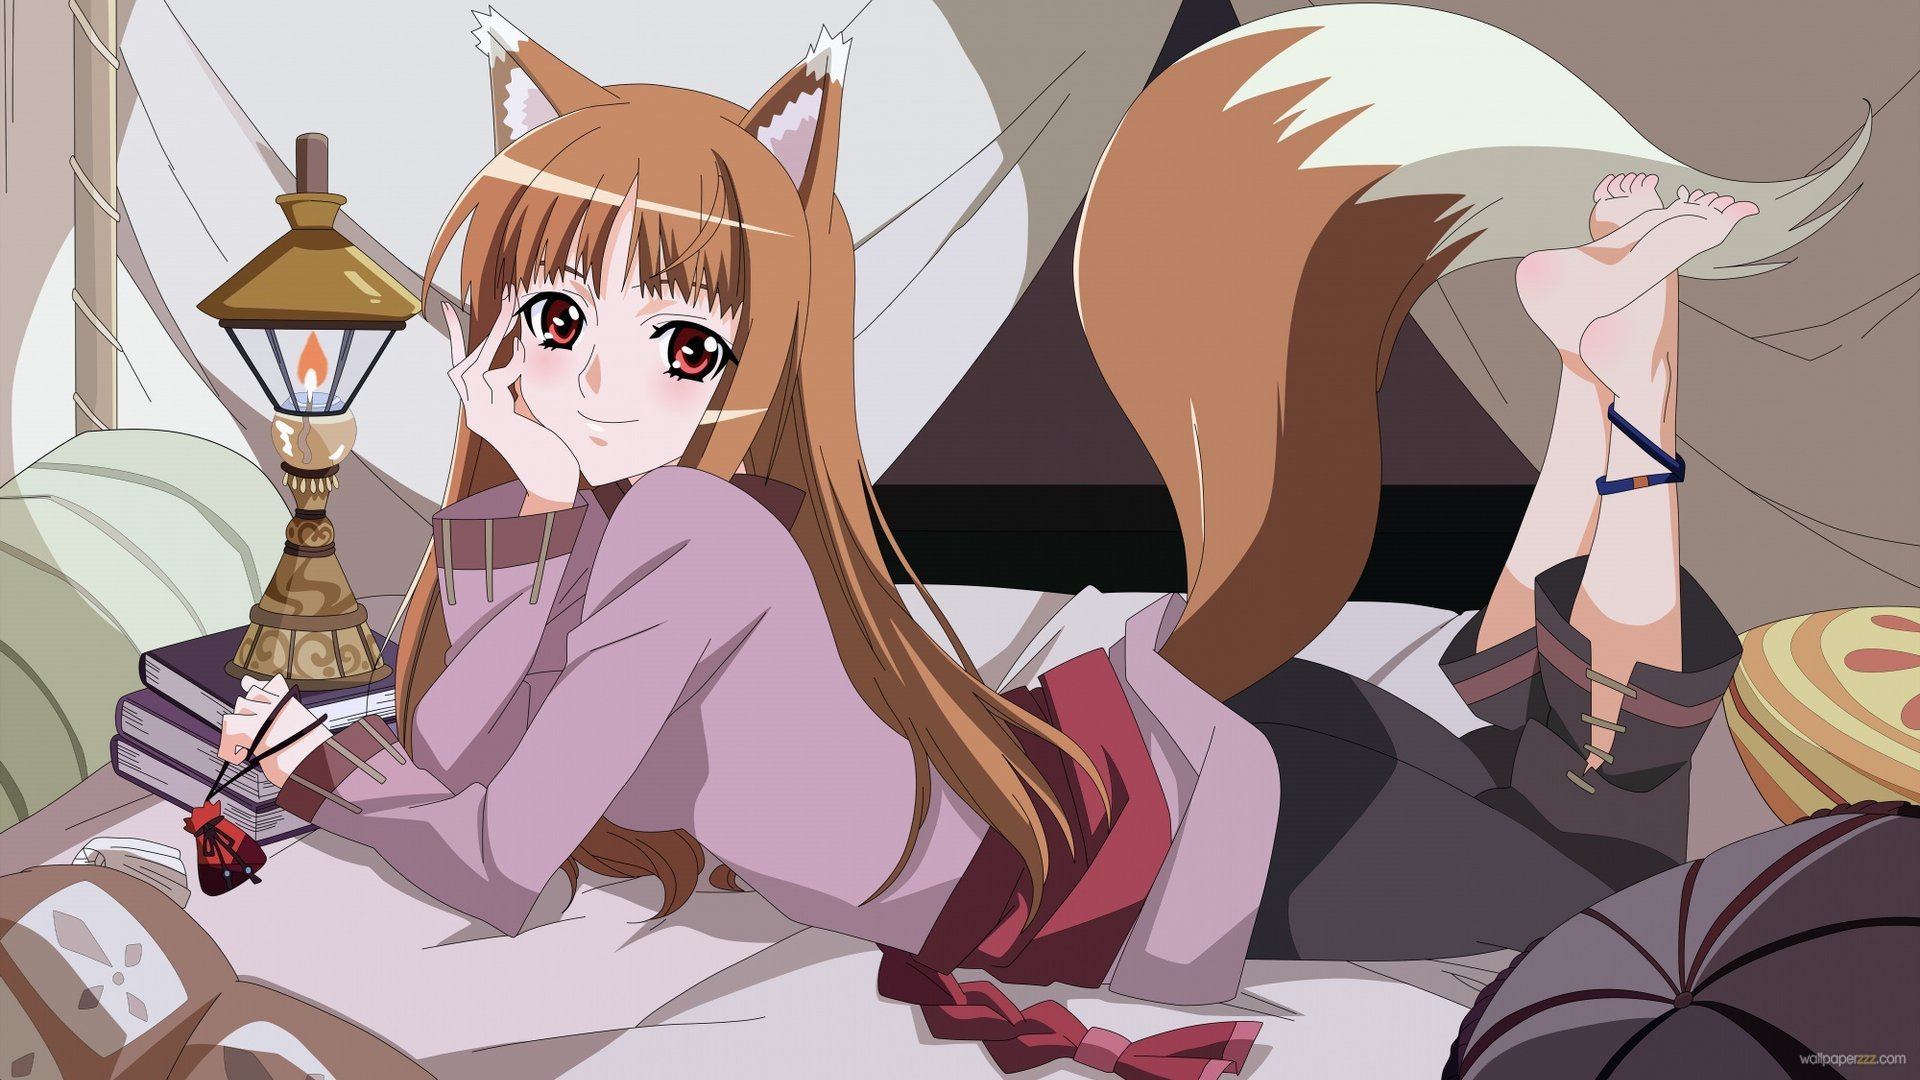 1920x1080 350+ Spice and Wolf HD Wallpapers and Backgrounds